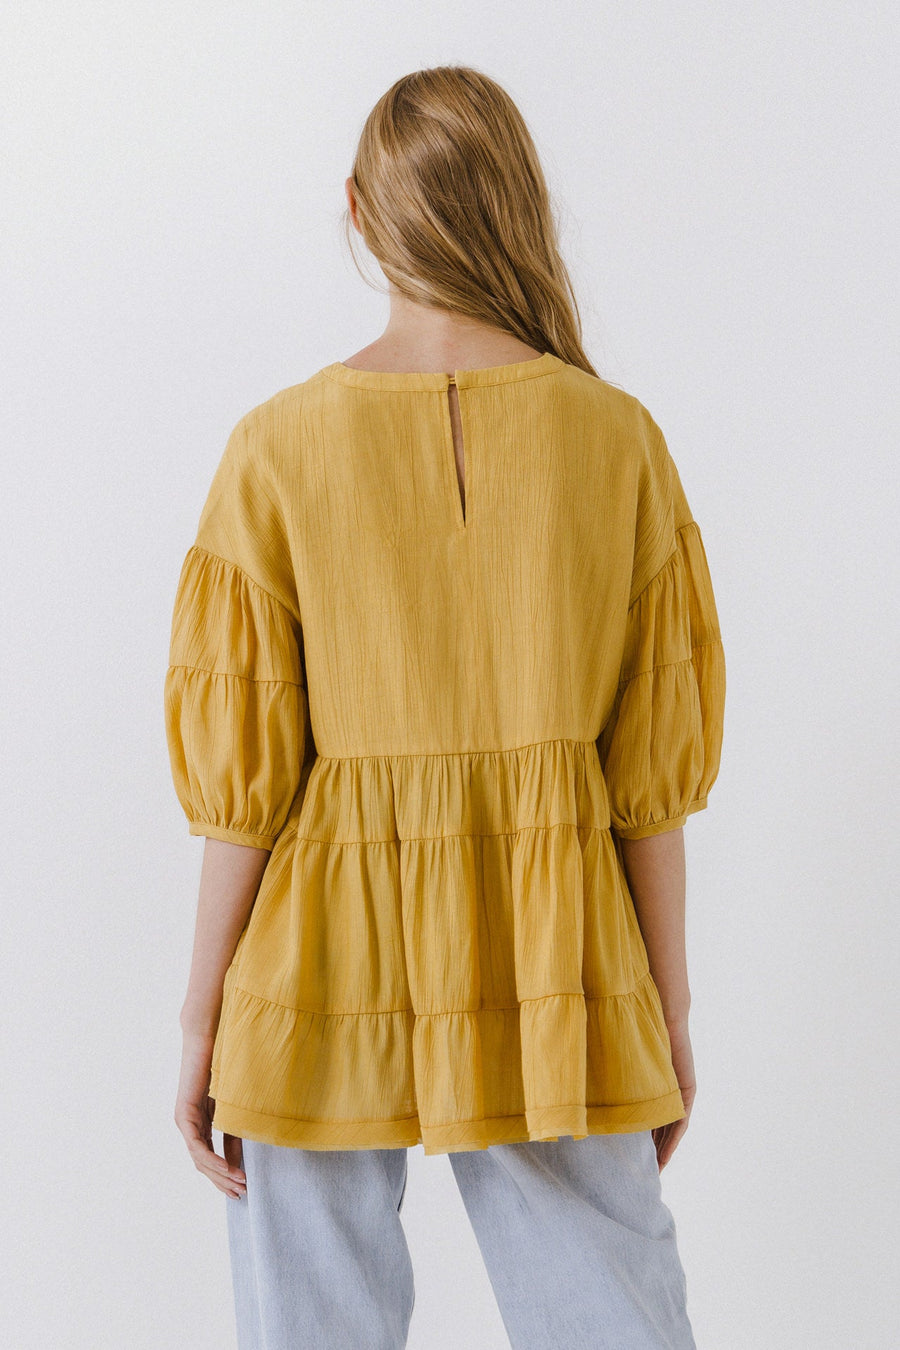 FREE THE ROSES - Round Neck Tiered Flowy Blouse - SHIRTS & BLOUSES available at Objectrare